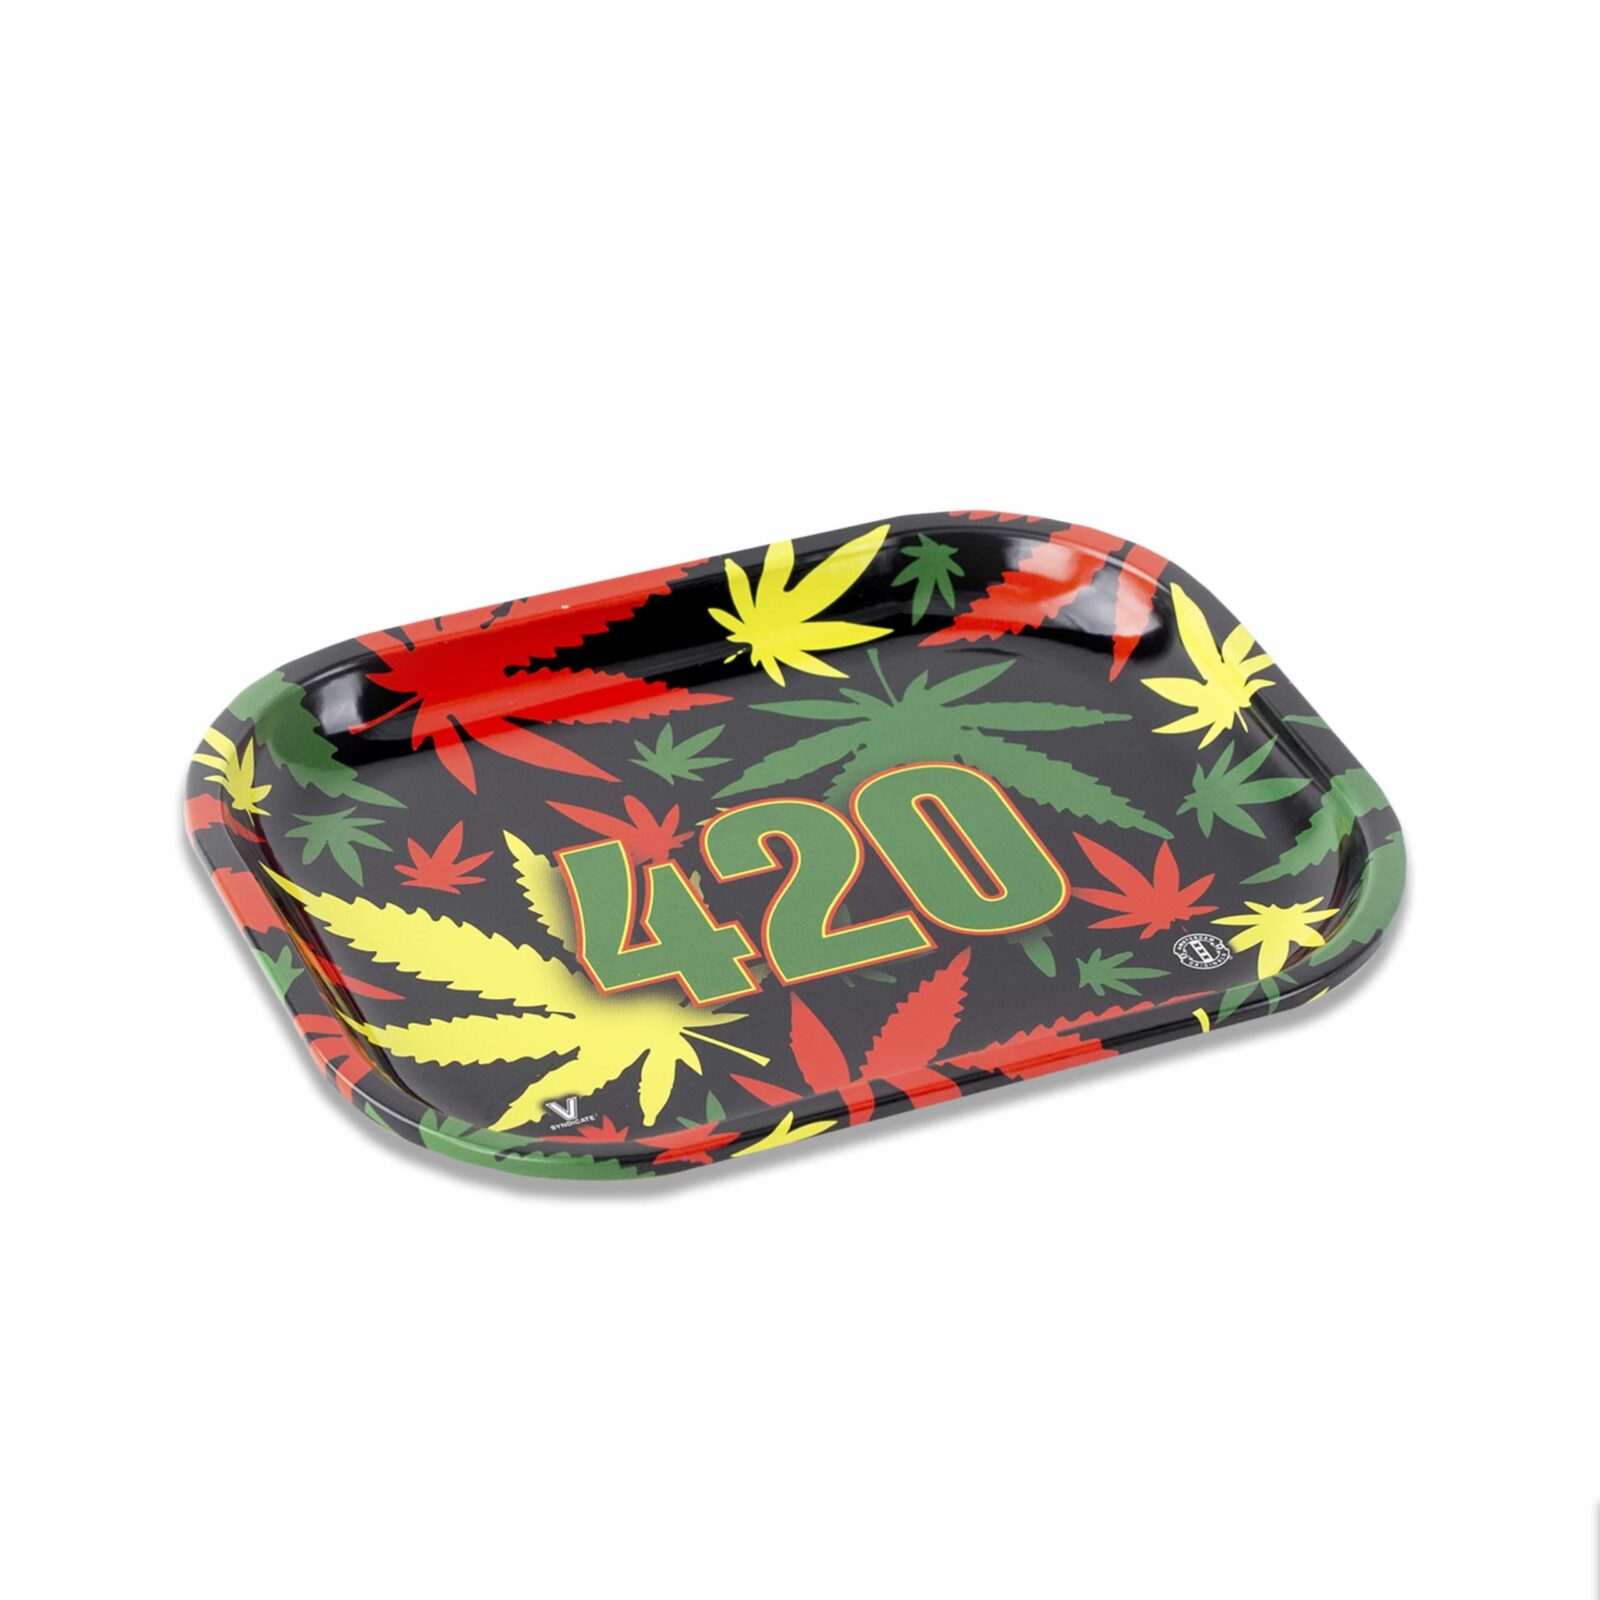 weed 420 square rolling tray side image